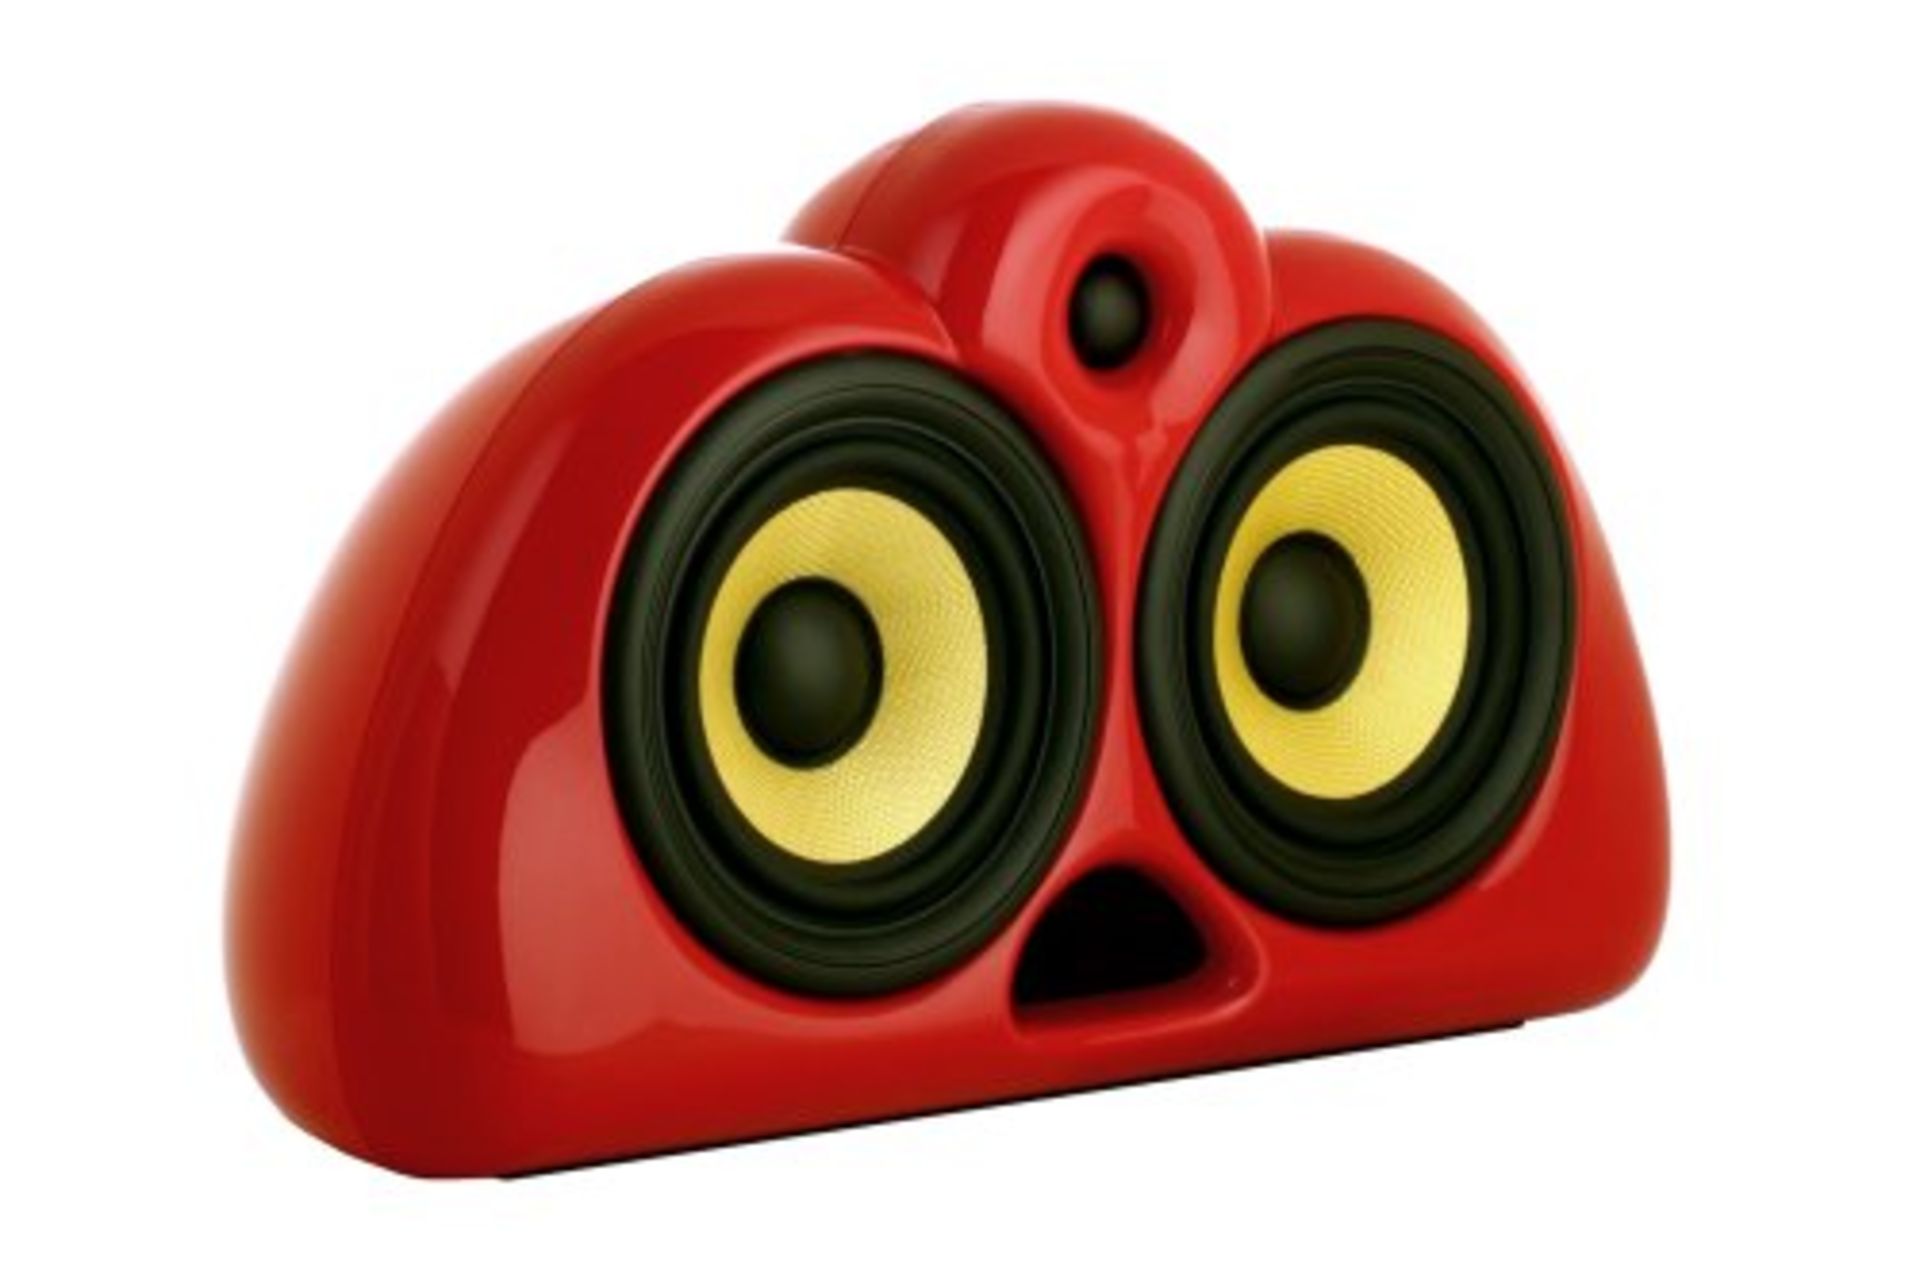 RRP £258.00 Podspeakers - Cinepod Speaker Centre Channel Red (CP009)